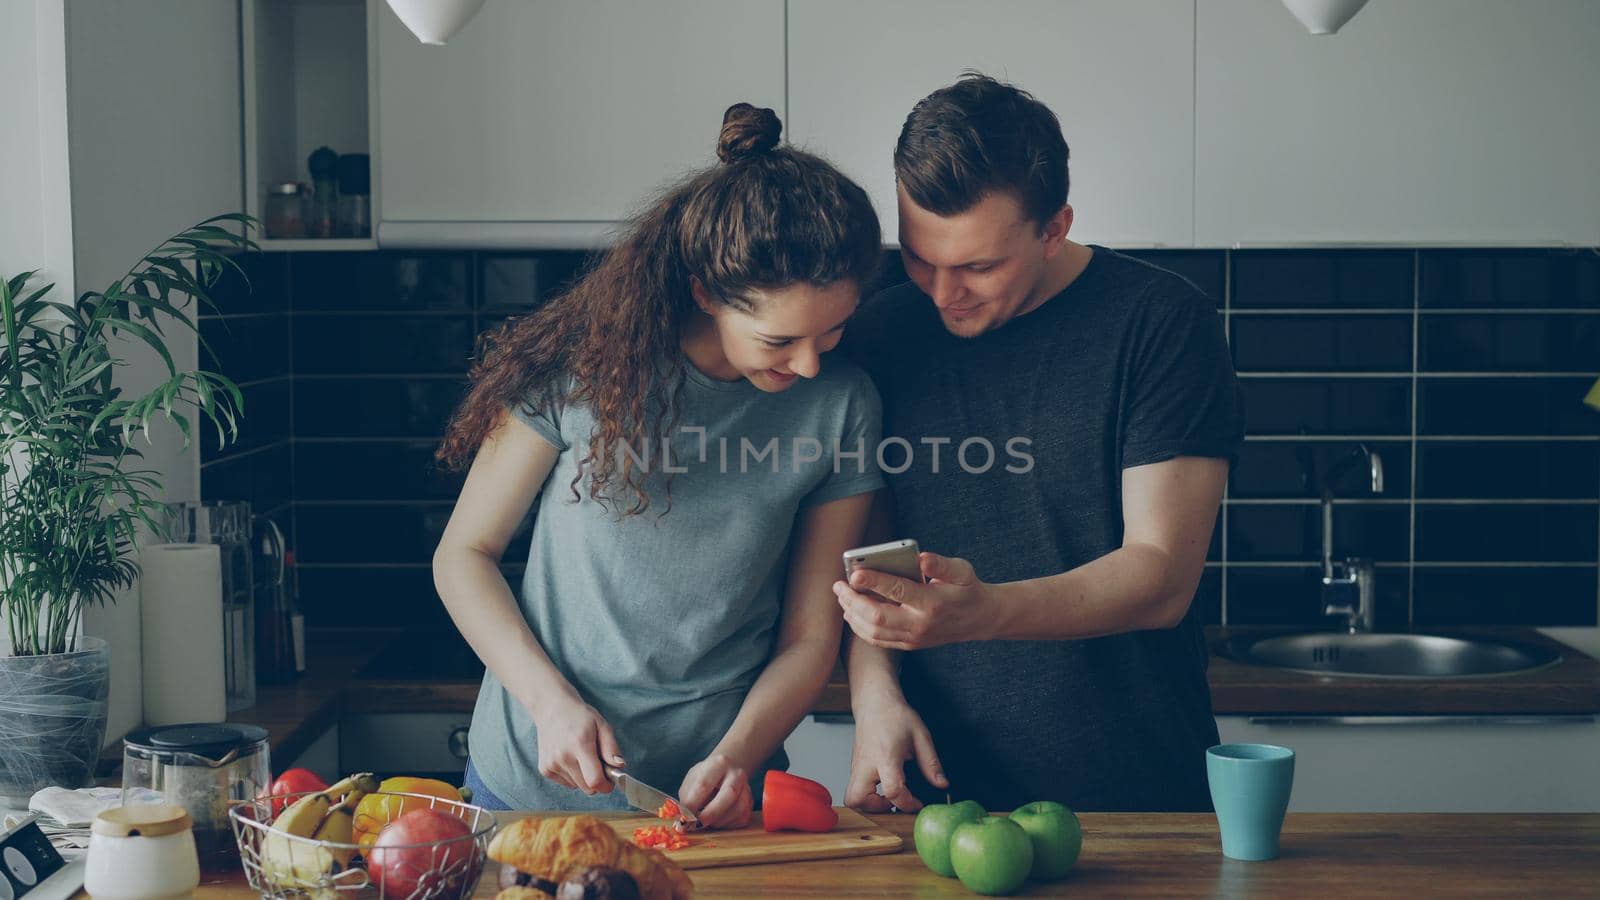 Curly woman near table cutting red pepper in kitchen at home, her boyfriend showing her something funny in smartphone and they are smiling by silverkblack